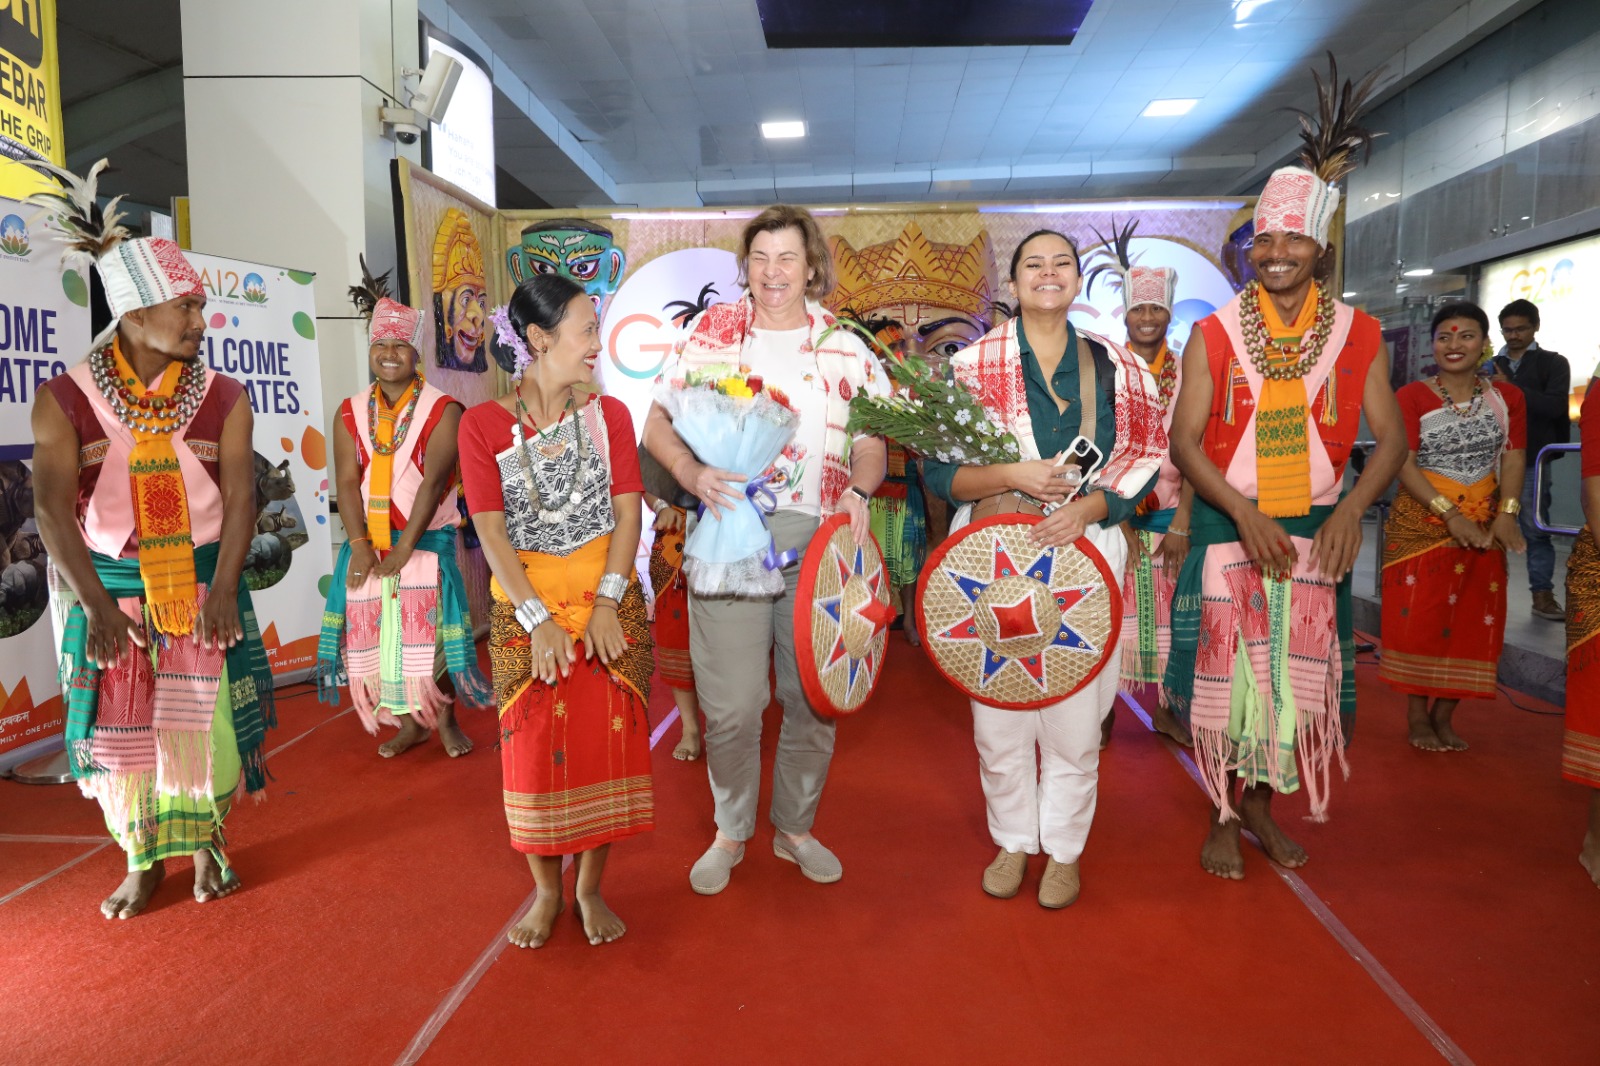 Delegates at the Airport while being received for attending the SAI20 Senior Official Meeting held from 13-14 March, 2023 at Guwahati, Assam